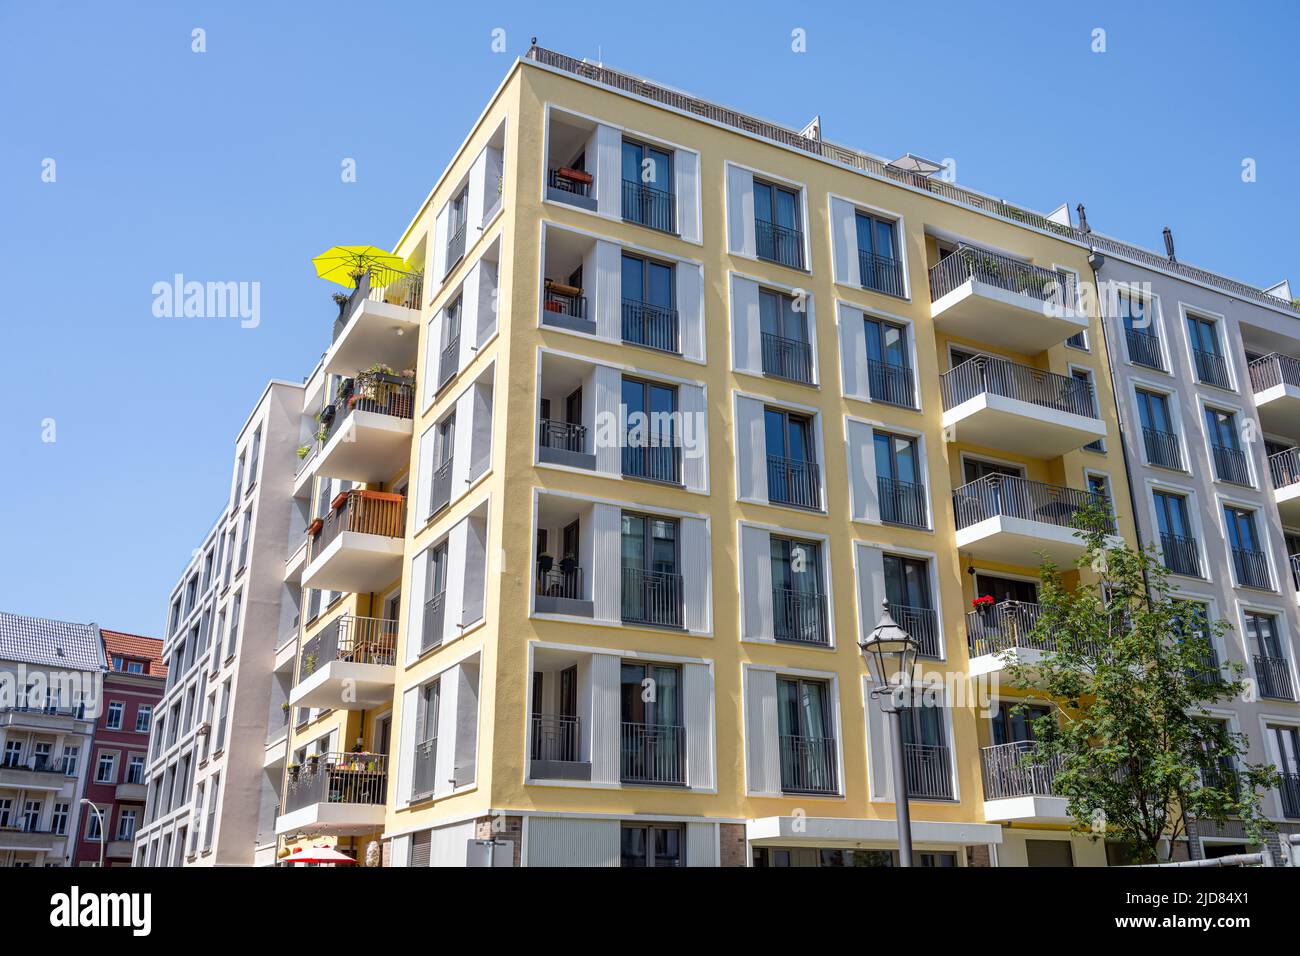 Modern apartment house with a yellow parasol seen in Berlin Stock Photo